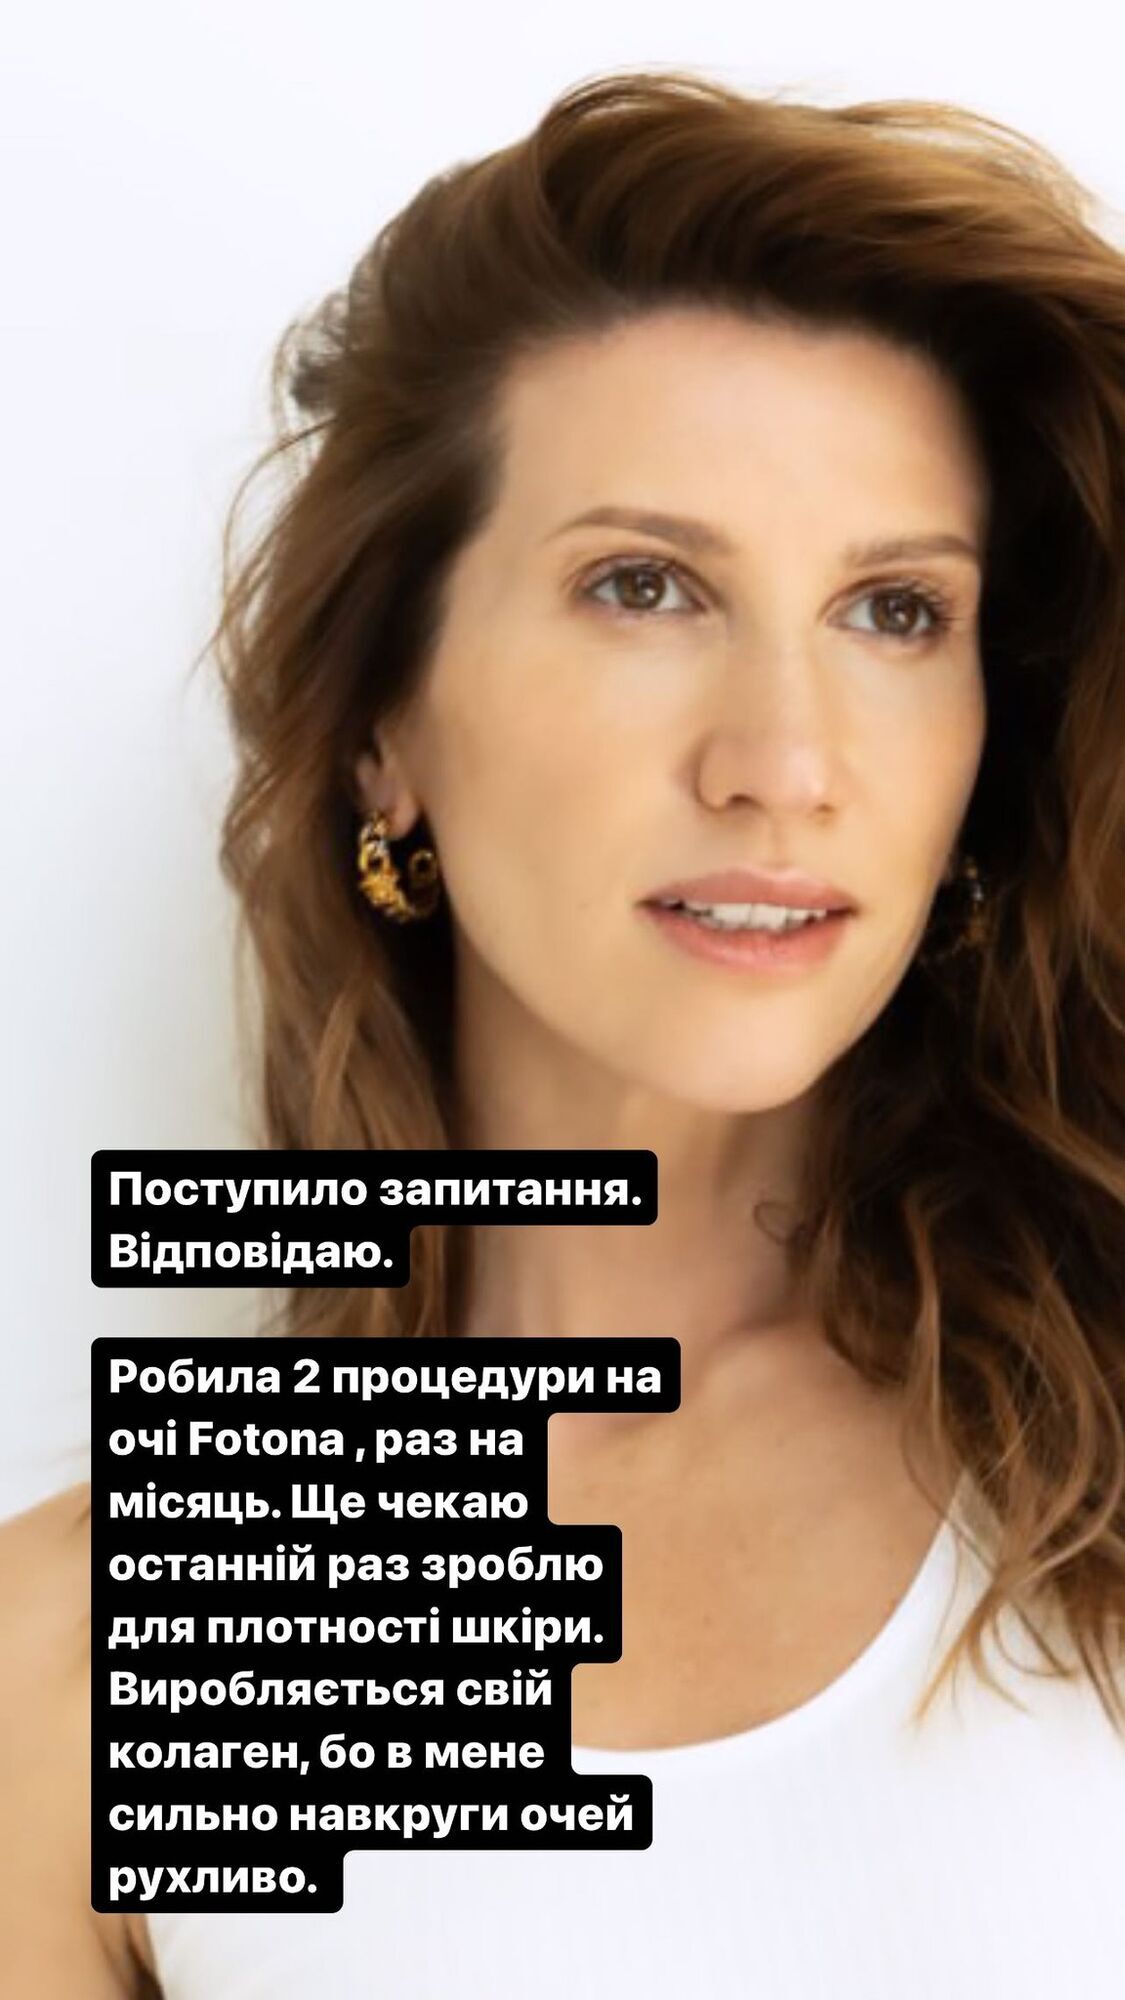 Anita Lutsenko spoke frankly about beauty injections and called her ''small breasts'' perfect